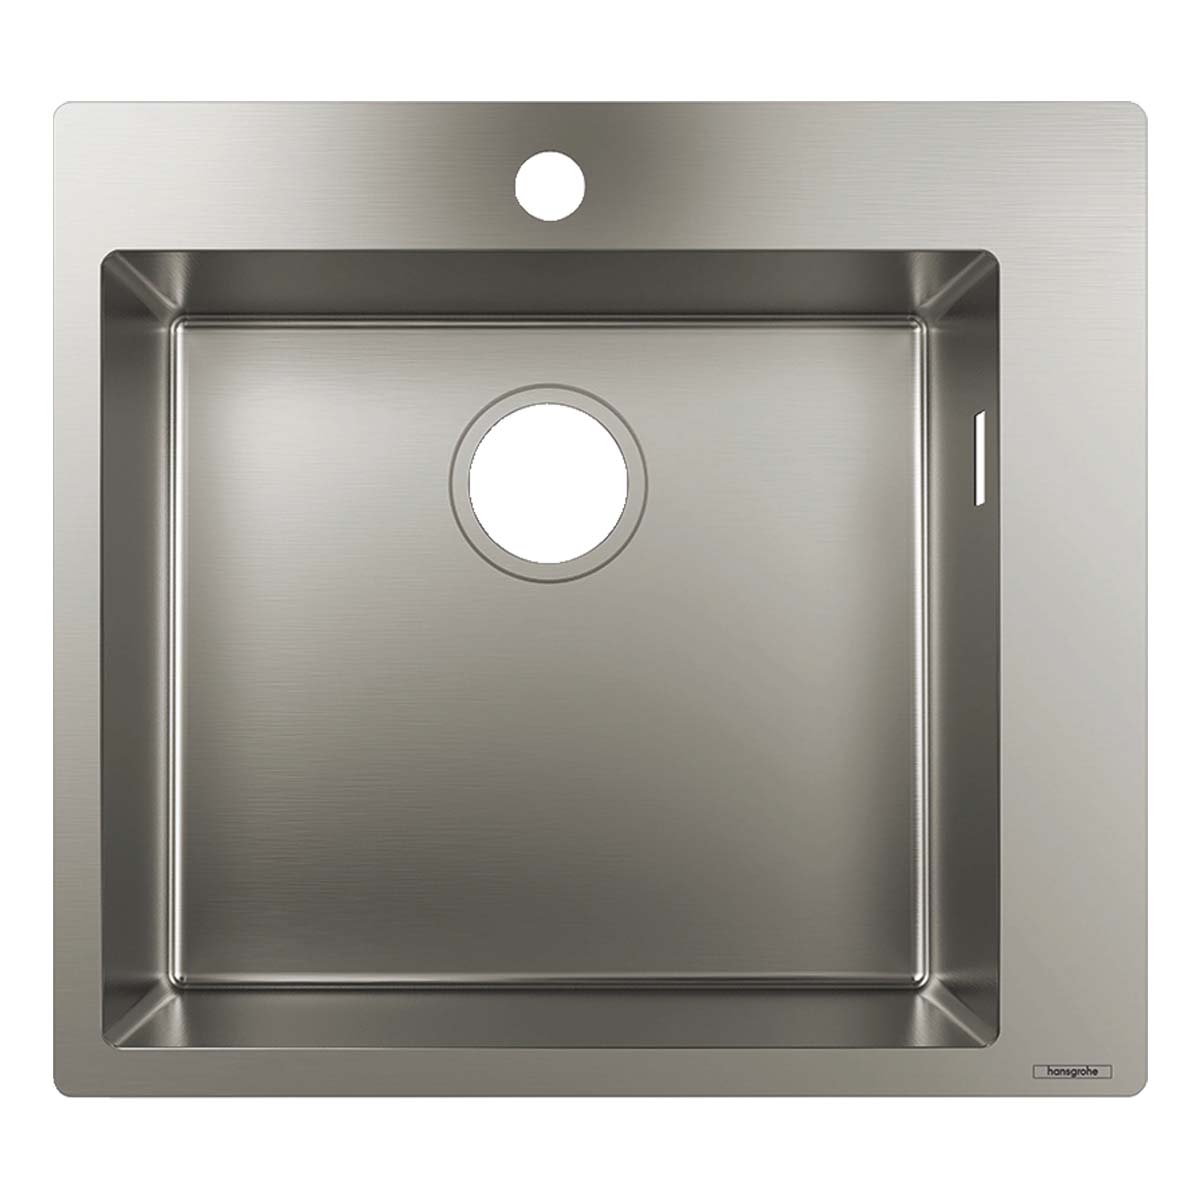 Hansgrohe S71 S712 F450 top flush mount 1 hole Single Bowl Kitchen Sink Stainless Steel 530x480mm